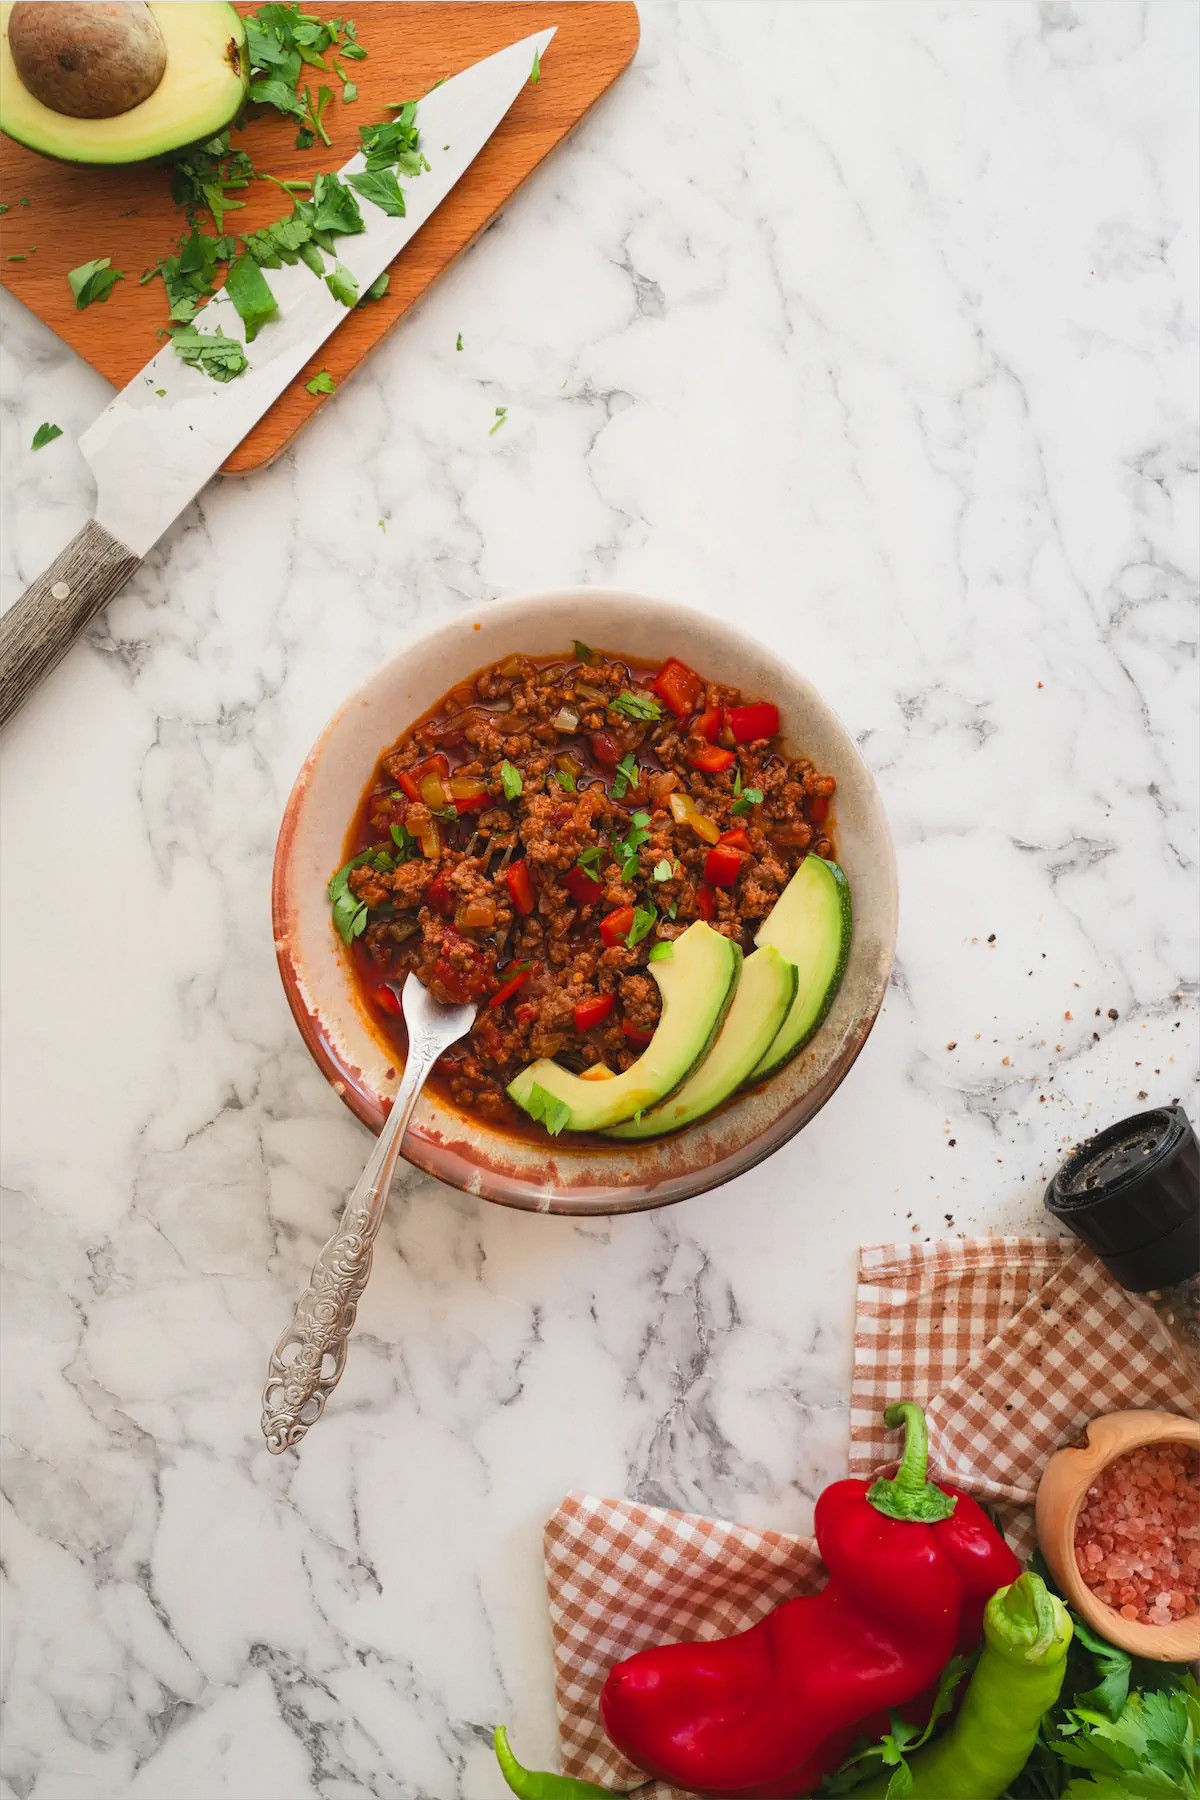 Keto chili con carne served with avocado slices in a bowl with a spoon.